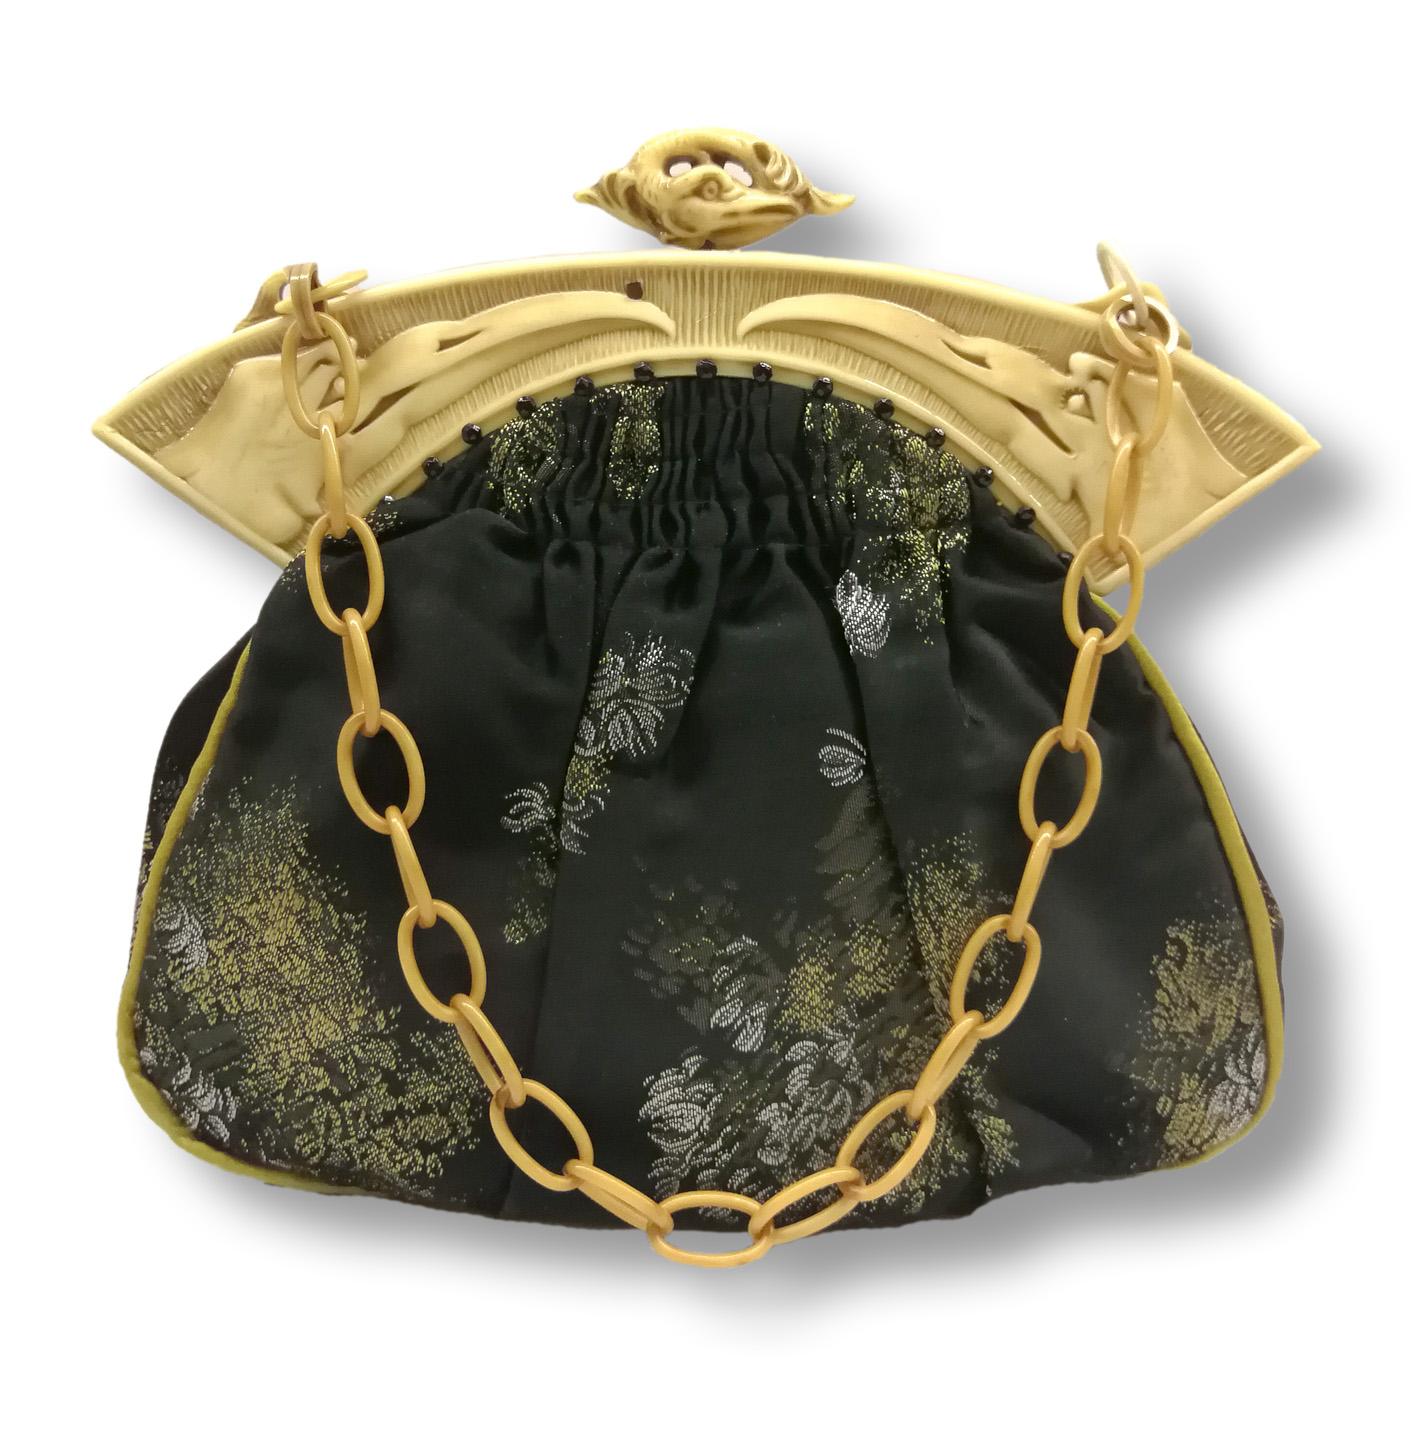 An exquisite handbag. Using an original 1920s French celluloid frame, a beautiful crafted handbag of original black patterned silk has been made anew for the bag. The frame imitates carved ivory (as did many early celluloid/Bakelite pieces from the